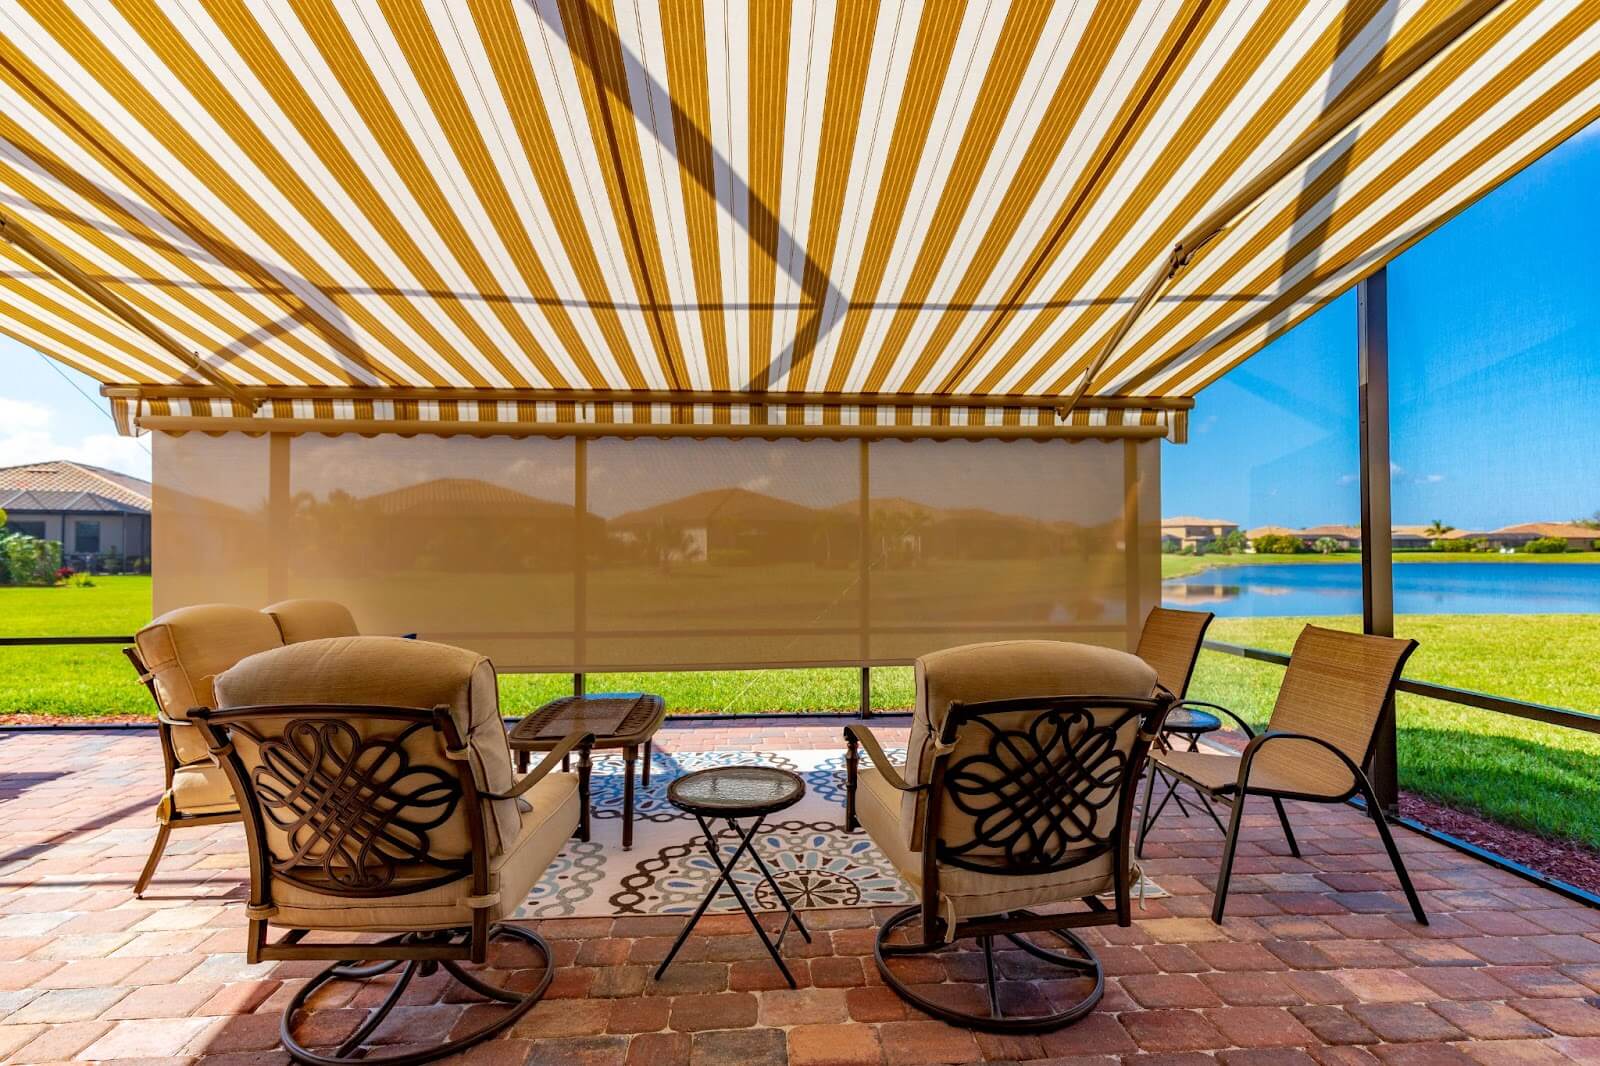 How To Make A Retractable Patio Awning